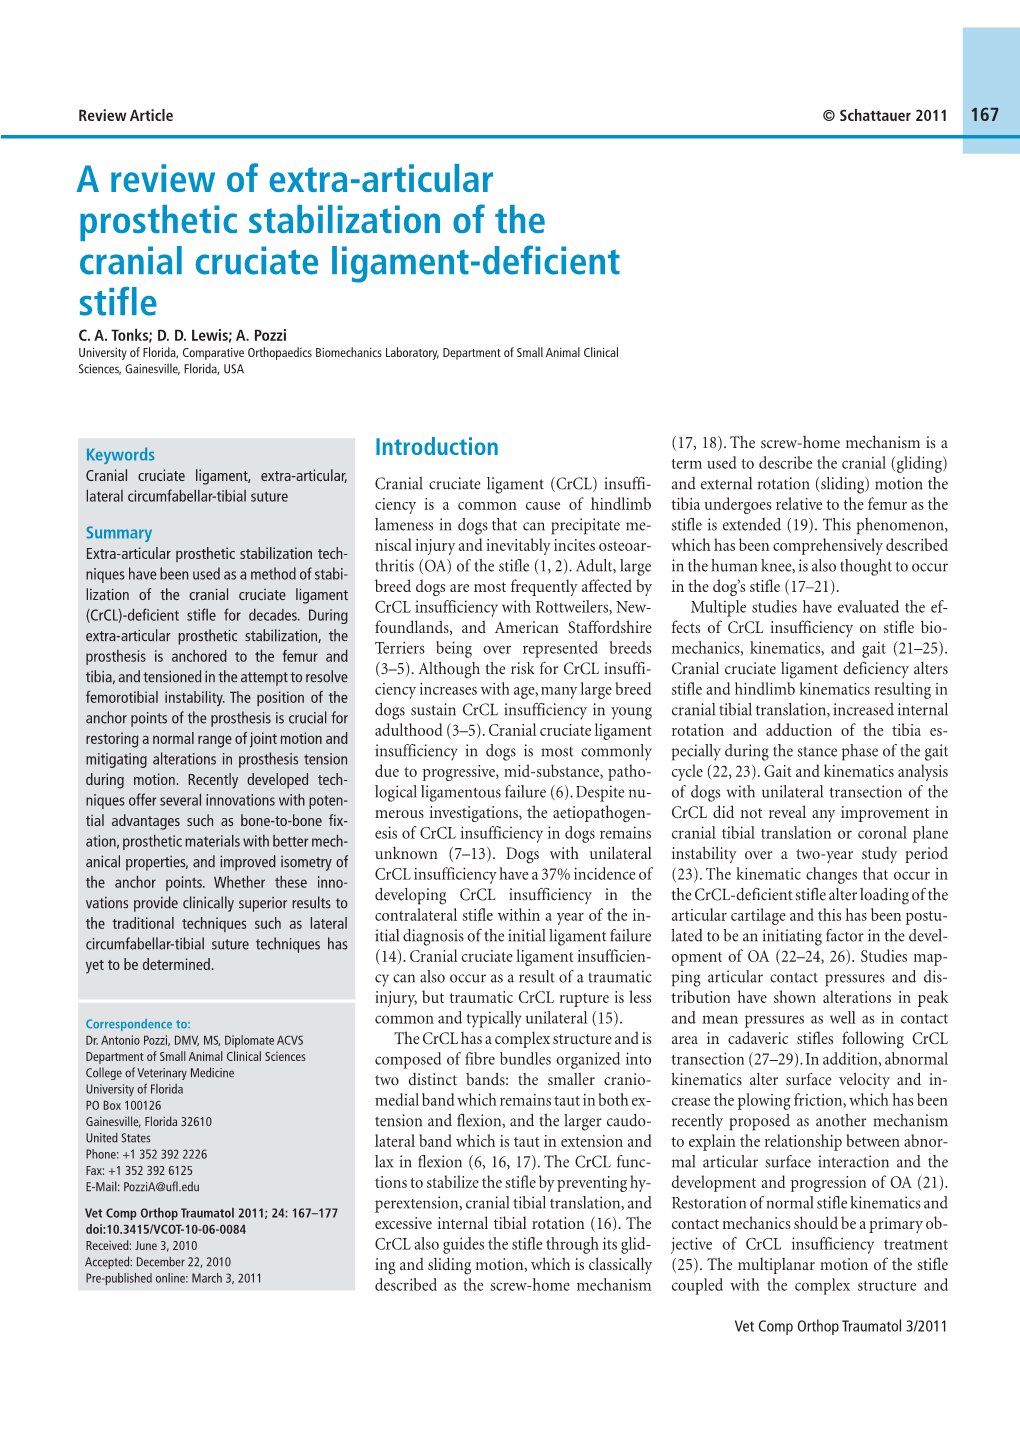 A Review of Extra-Articular Prosthetic Stabilization of the Cranial Cruciate Ligament-Deficient Stifle C